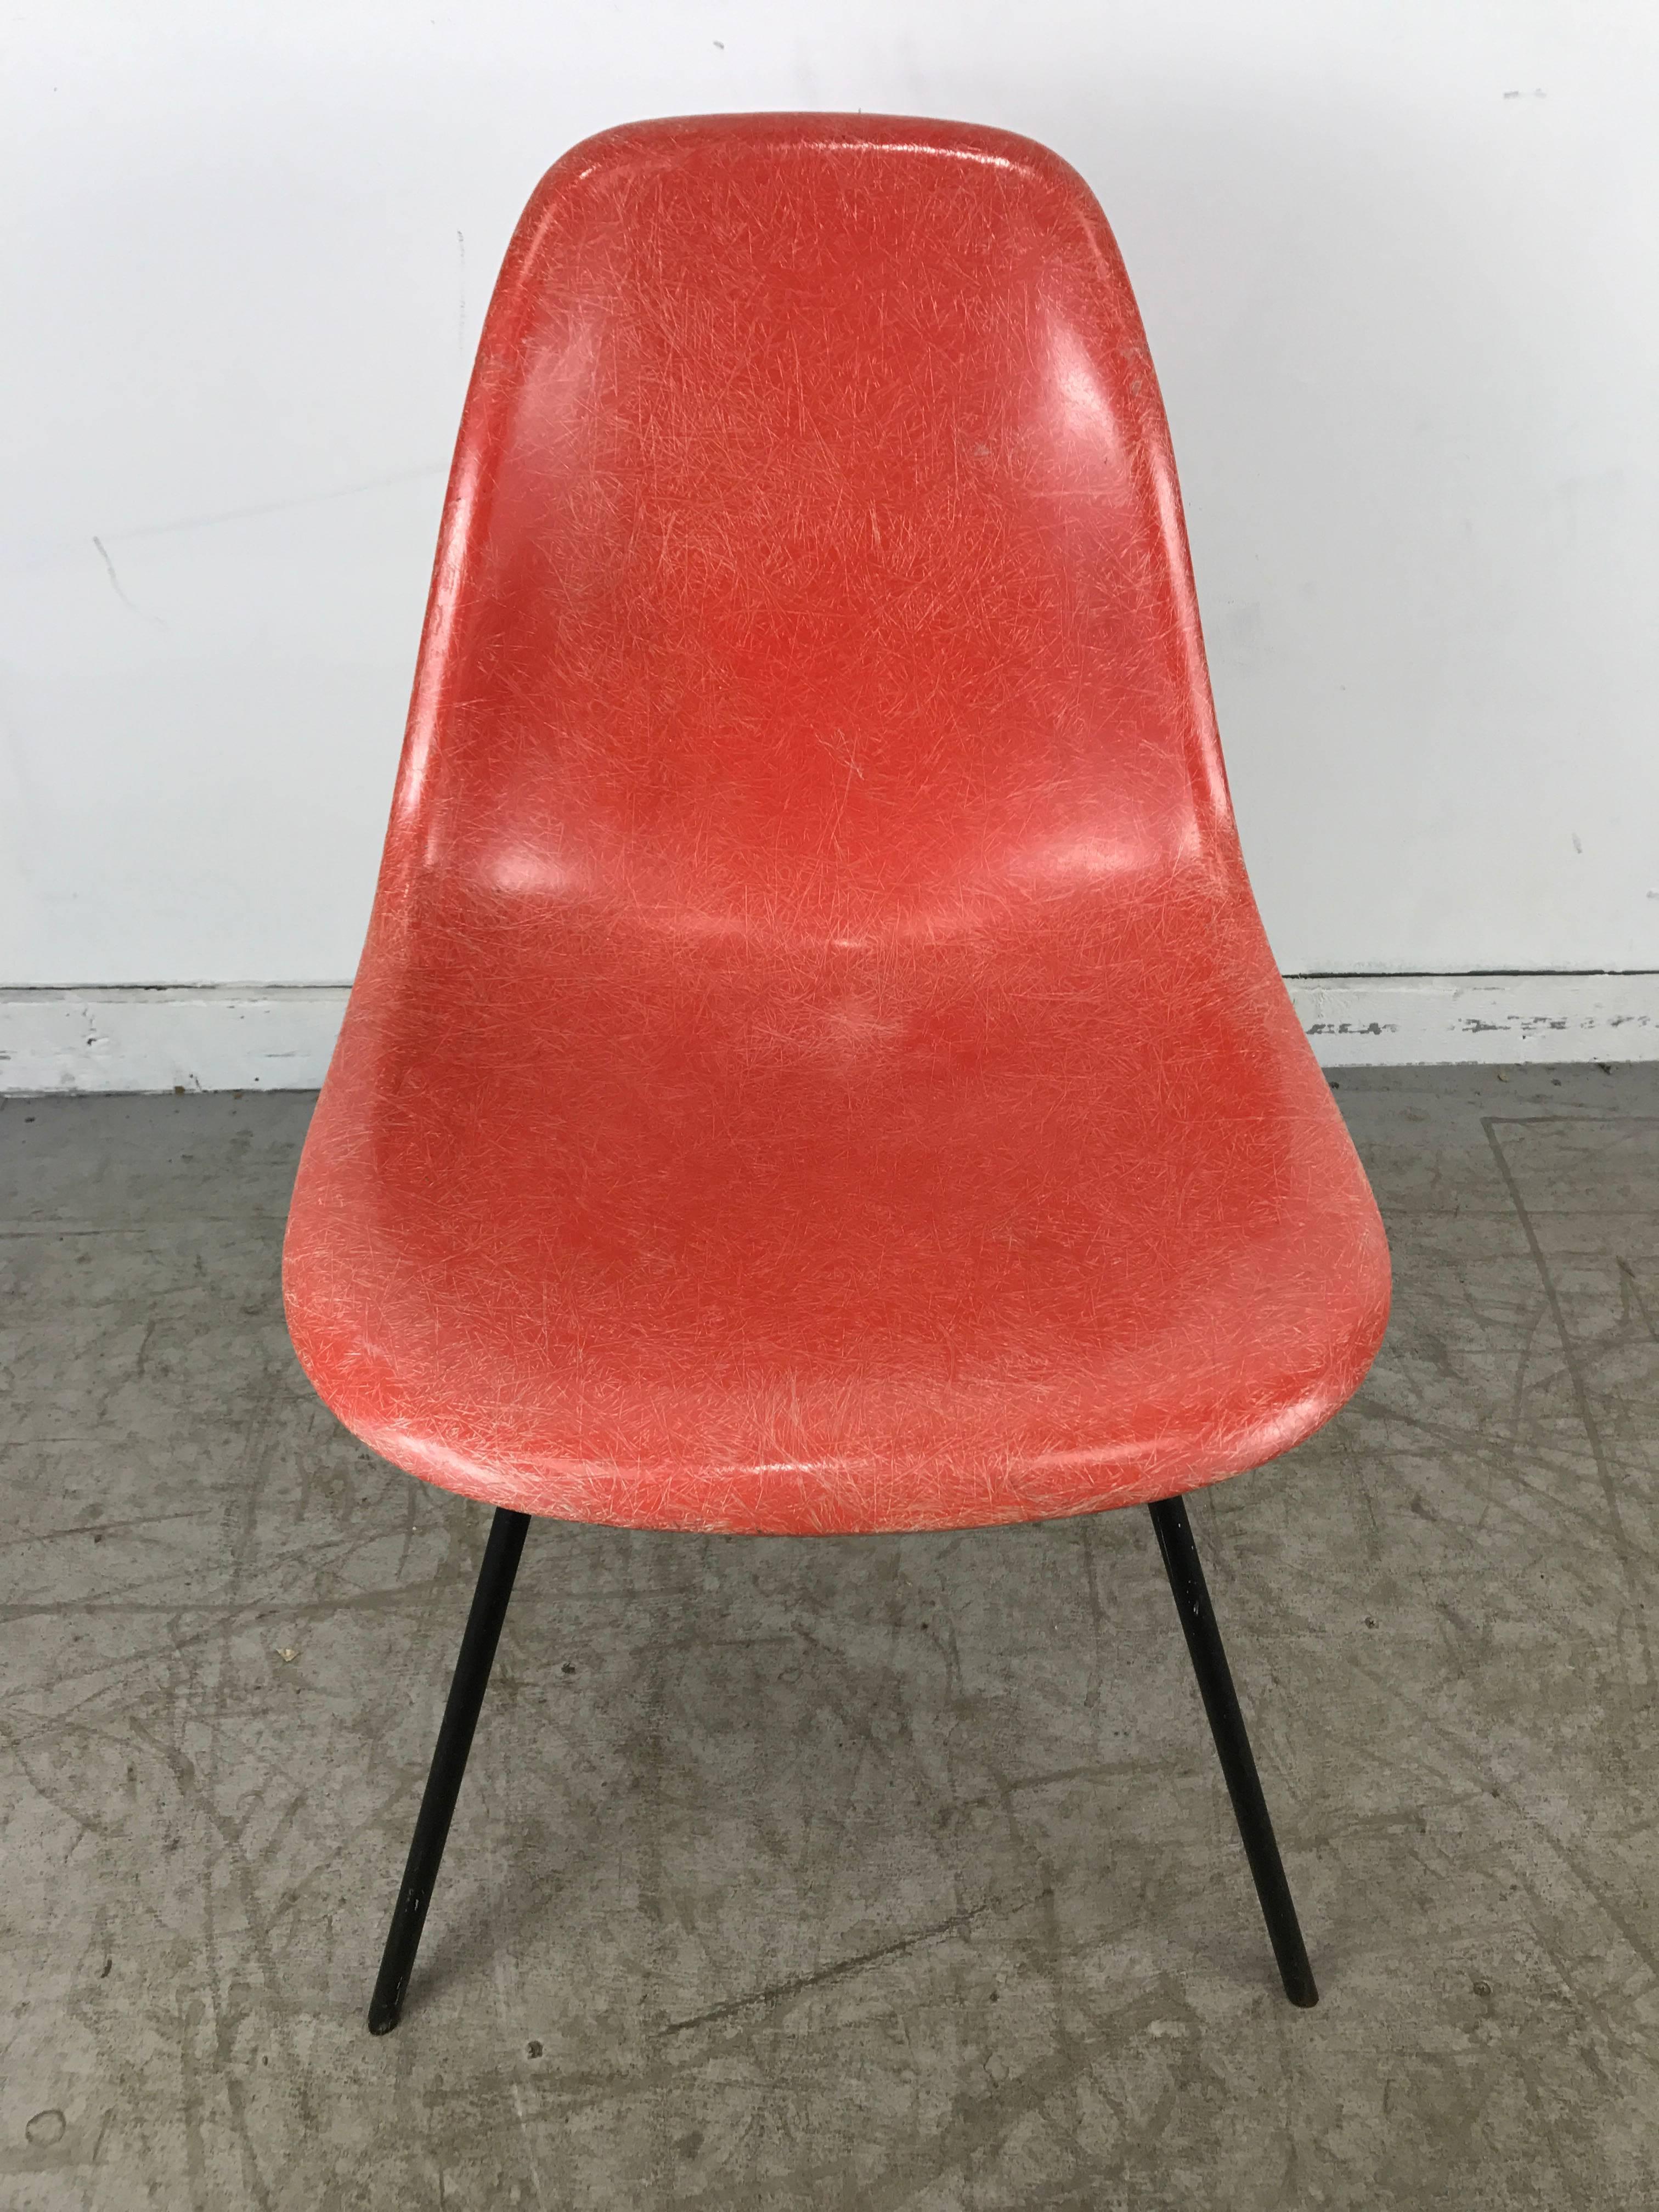 Molded Mid-Century First Year Production Charles Eames Fiberglass Side Chair X-Base